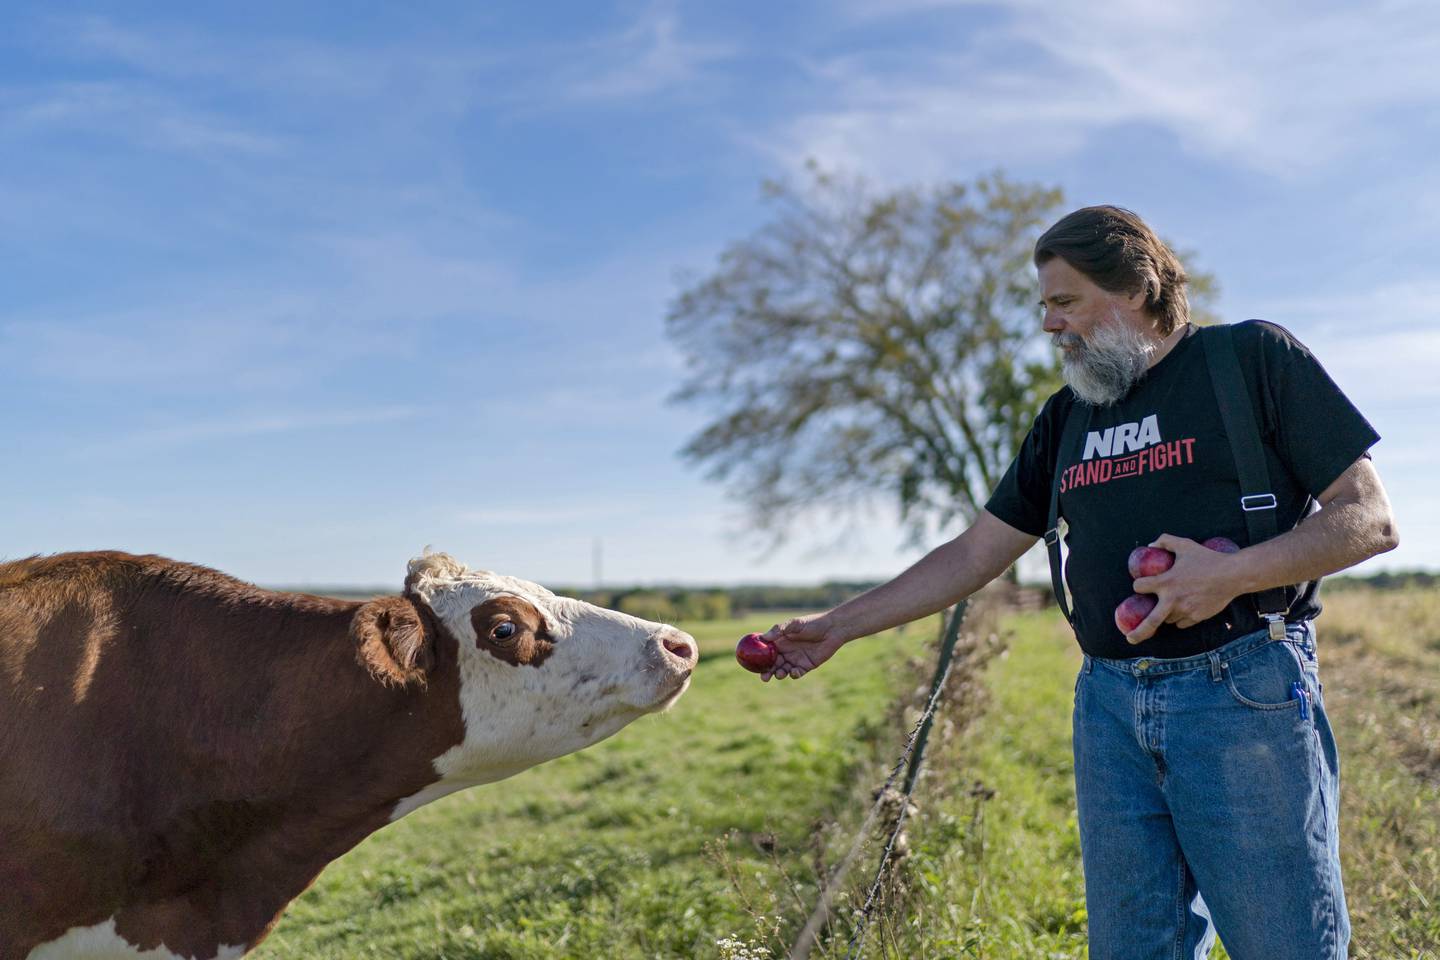 John Kraft feeds an apple to one of his cows at his home in Clear Lake, Wis., Wednesday, Sept. 28, 2022. "It's no longer left versus right, Democrat versus Republican," says Kraft, a software architect and data analyst. "It's straight up good versus evil." He knows how he sounds. He's felt the contempt of people who see him as a fanatic, a conspiracy theorist. (AP Photo/David Goldman)